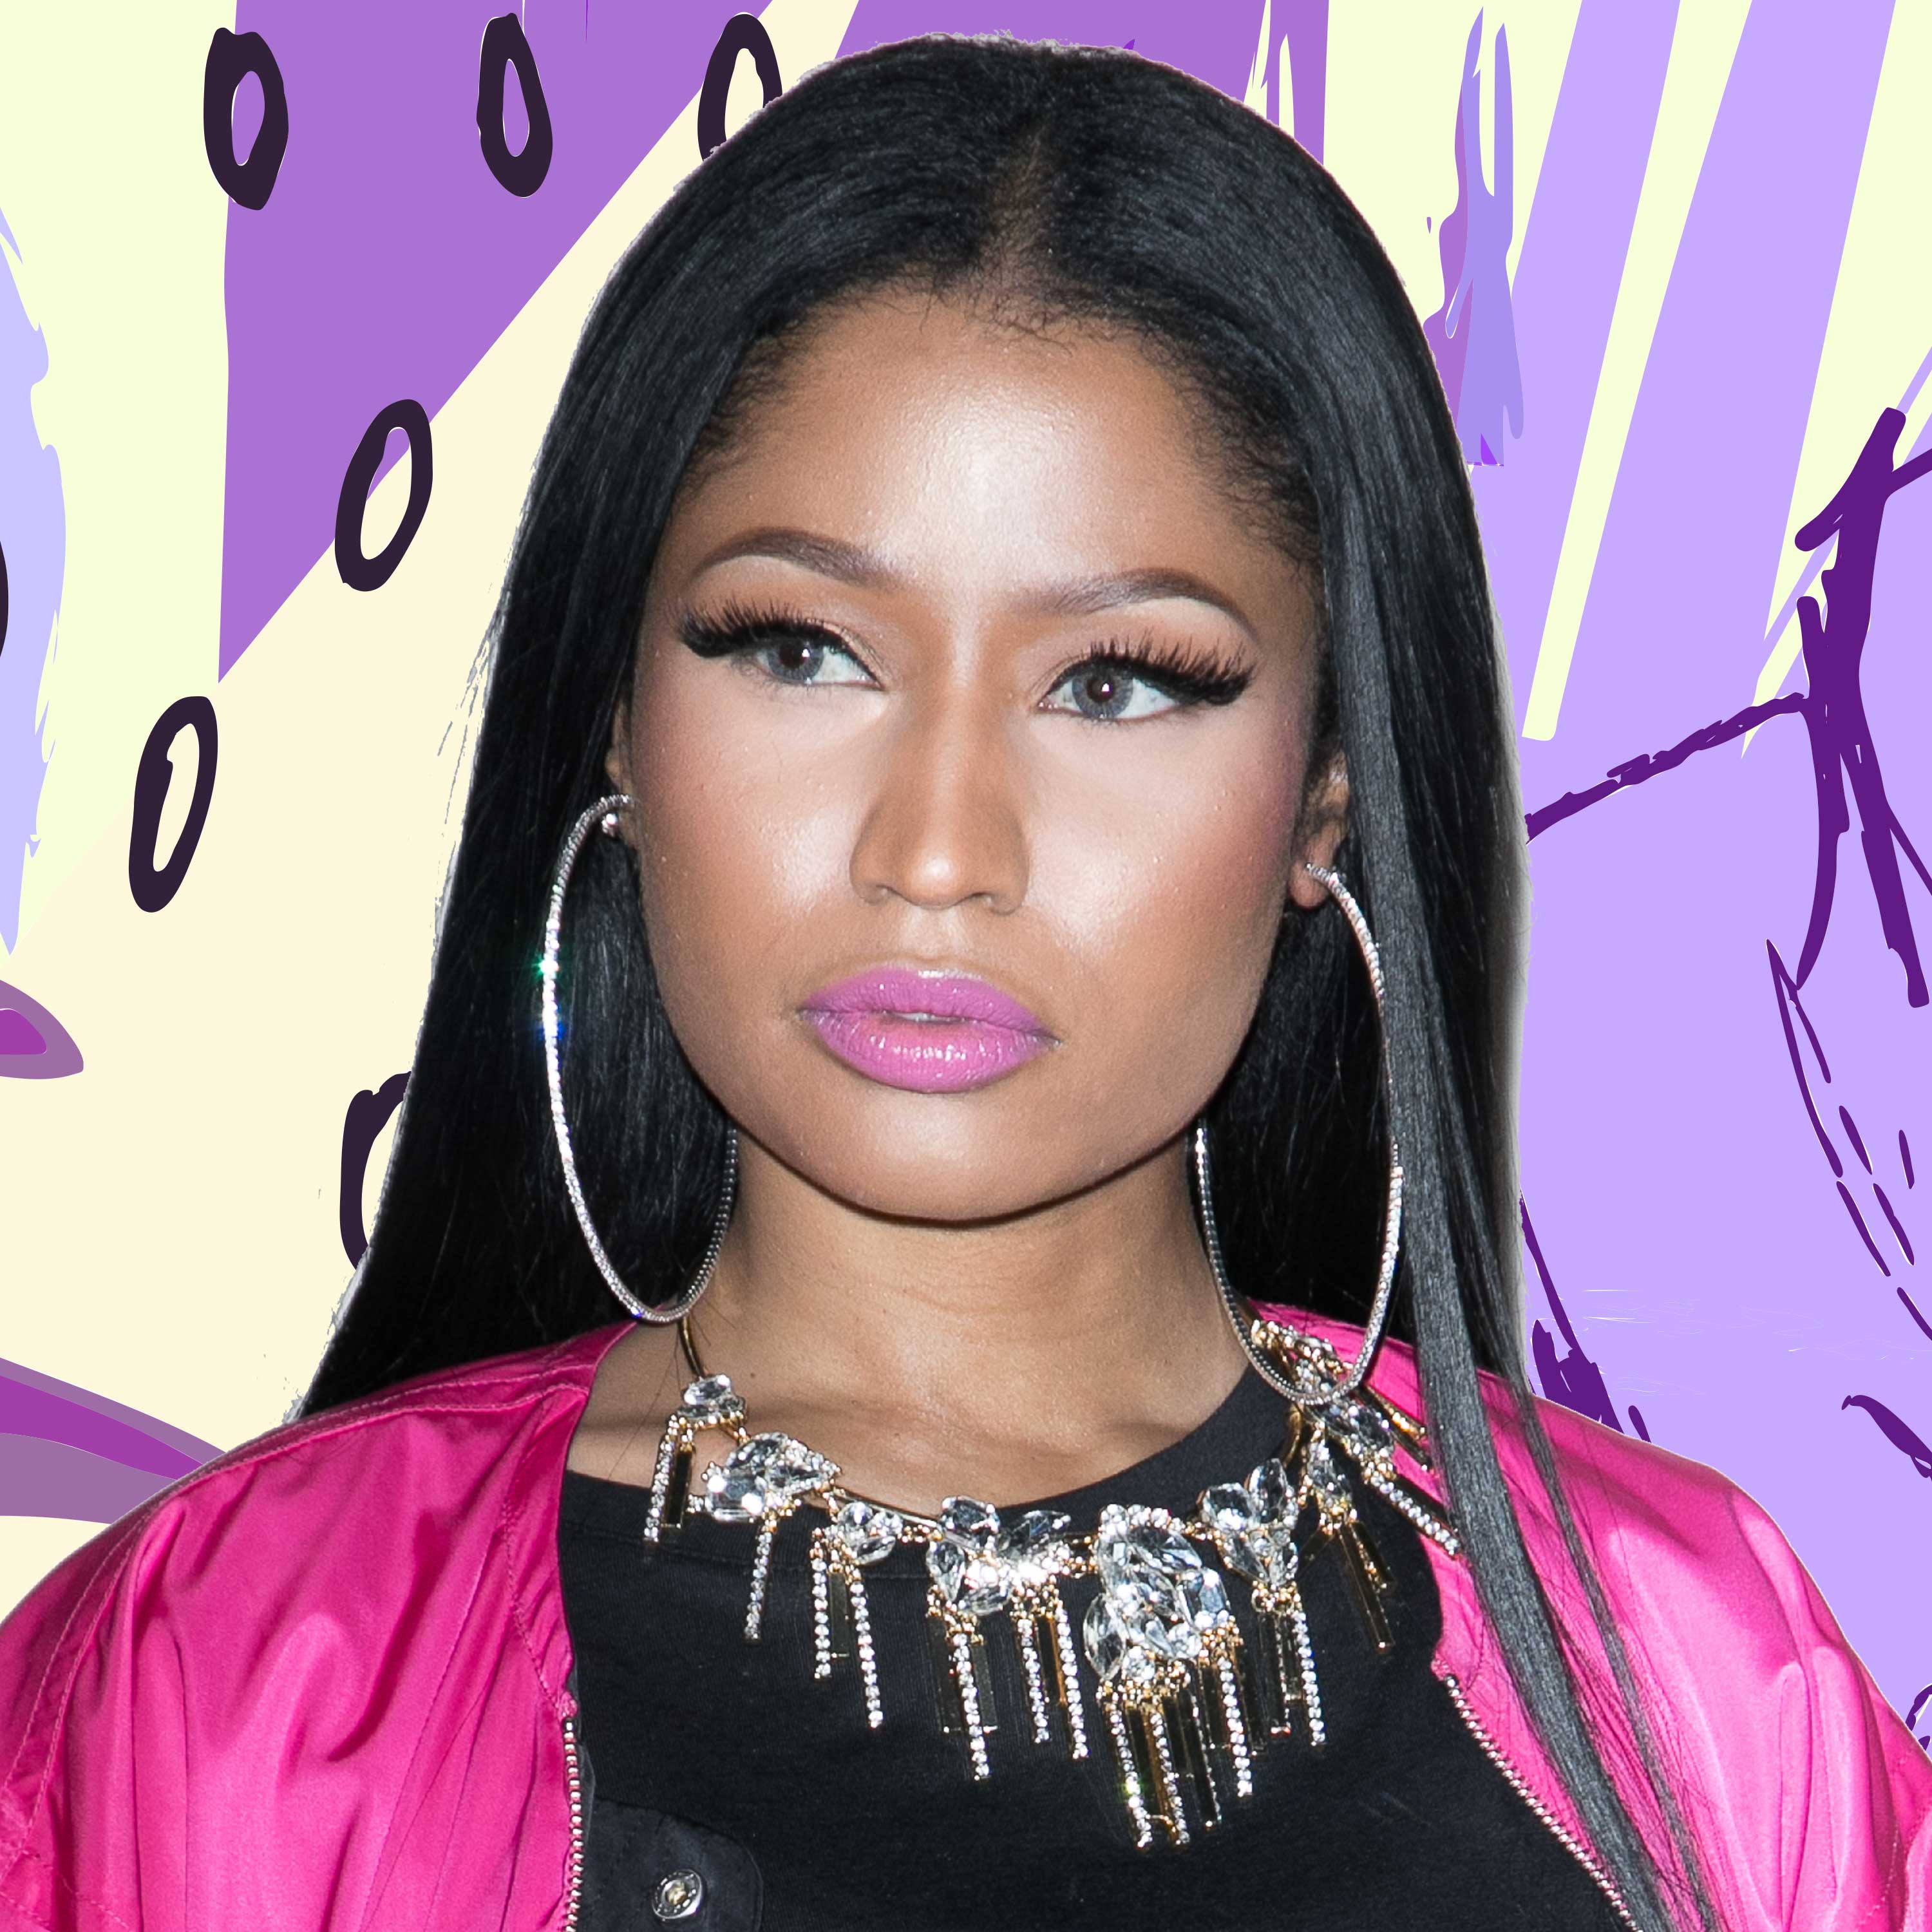 Here’s Everything We Know About The Recent Blow Up Between Cardi B And Nicki Minaj